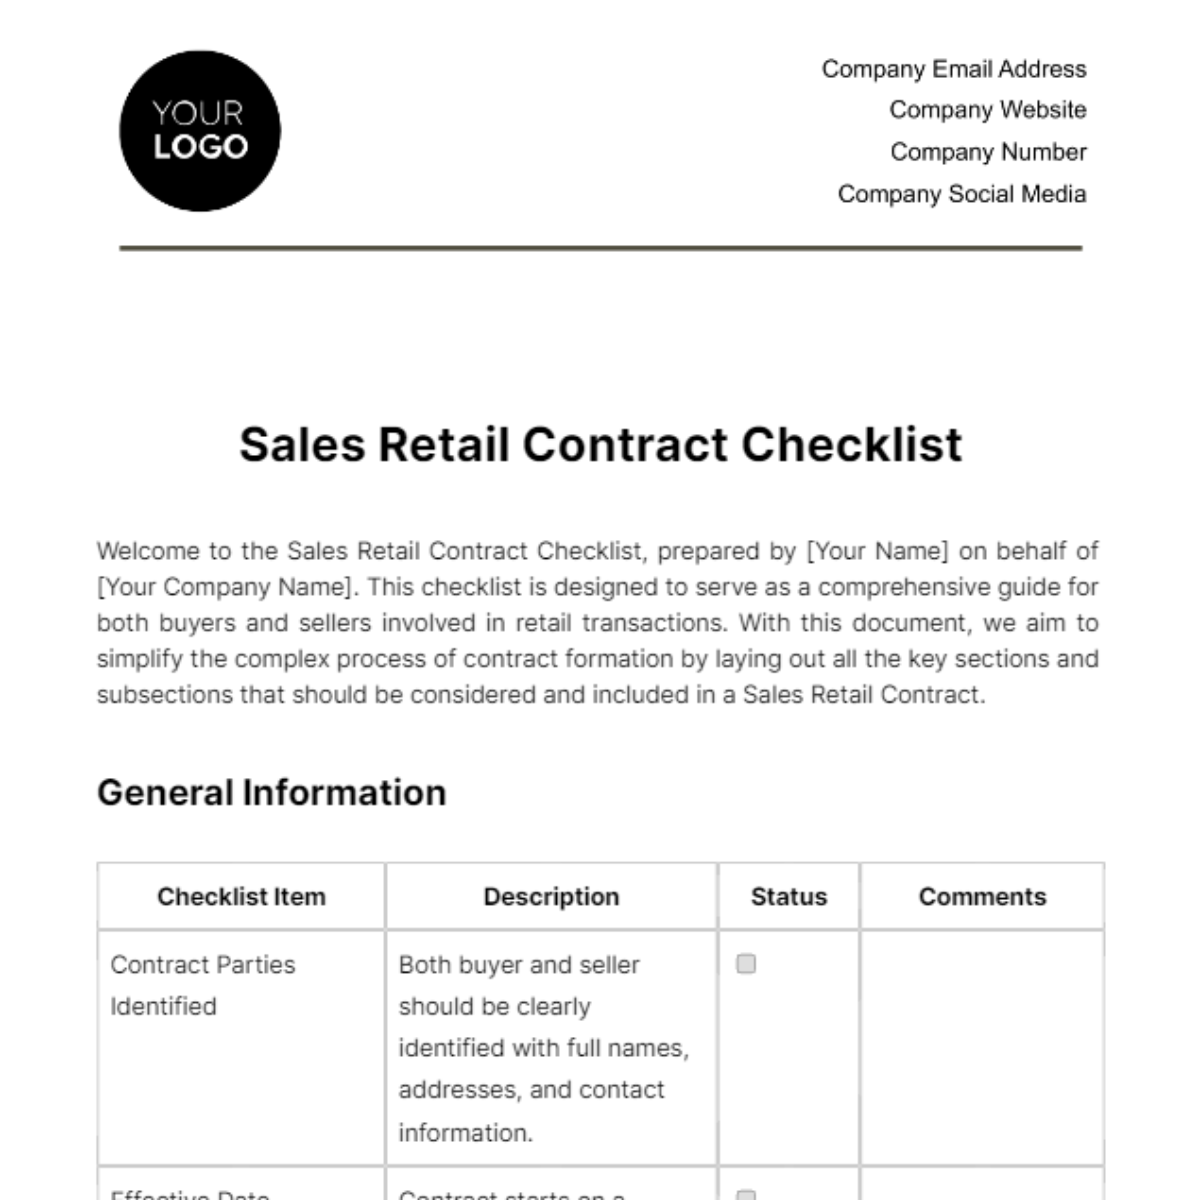 Sales Retail Contract Checklist Template